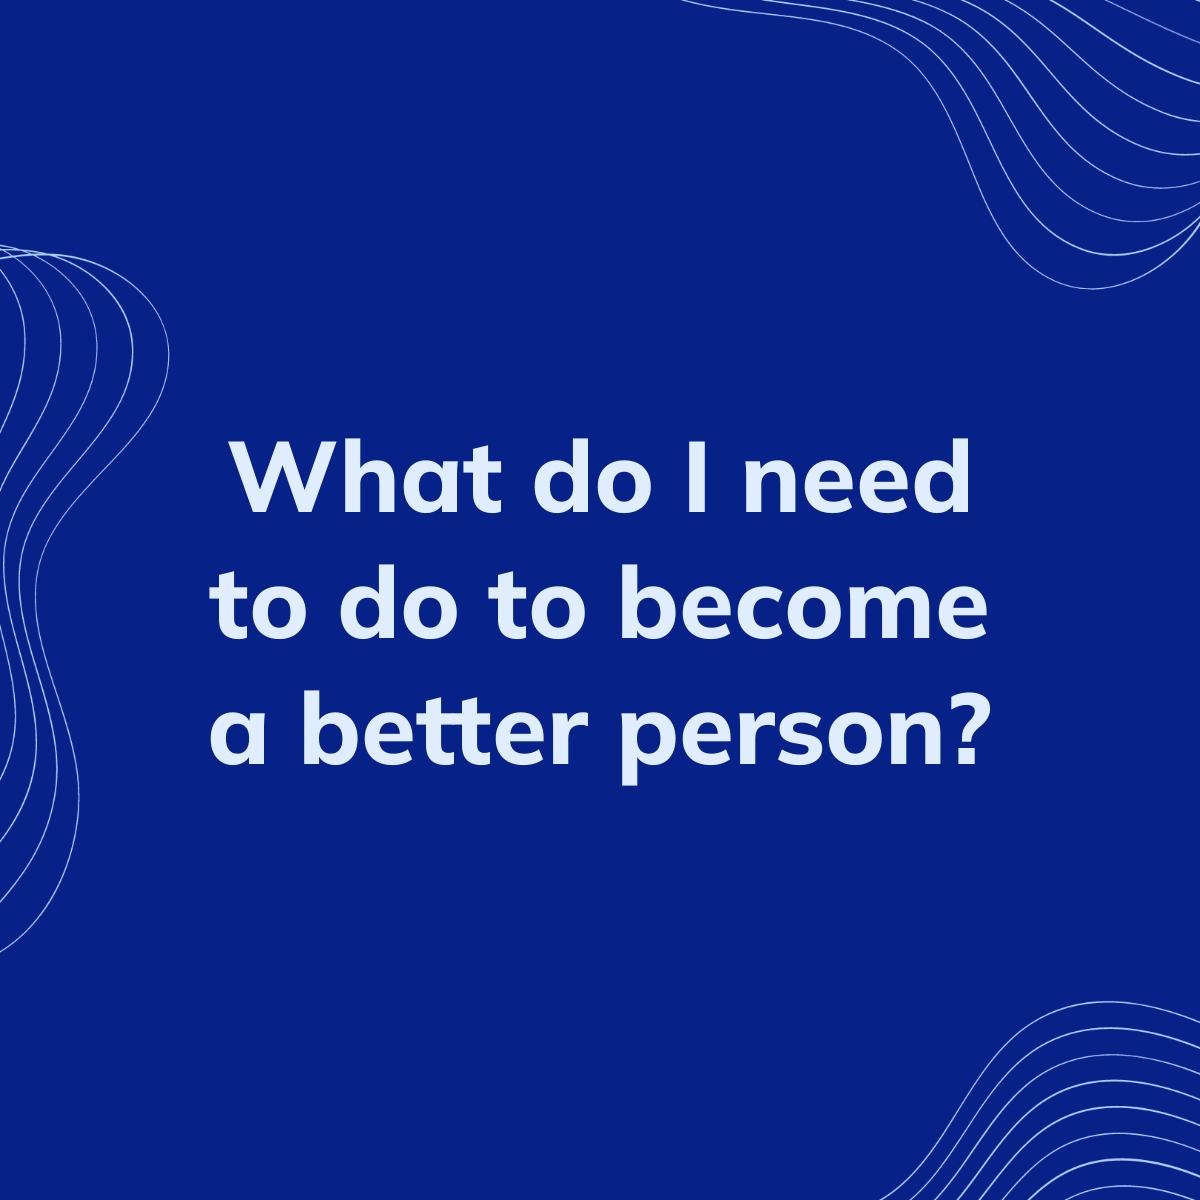 Journal Prompt: What do I need to do to become a better person?